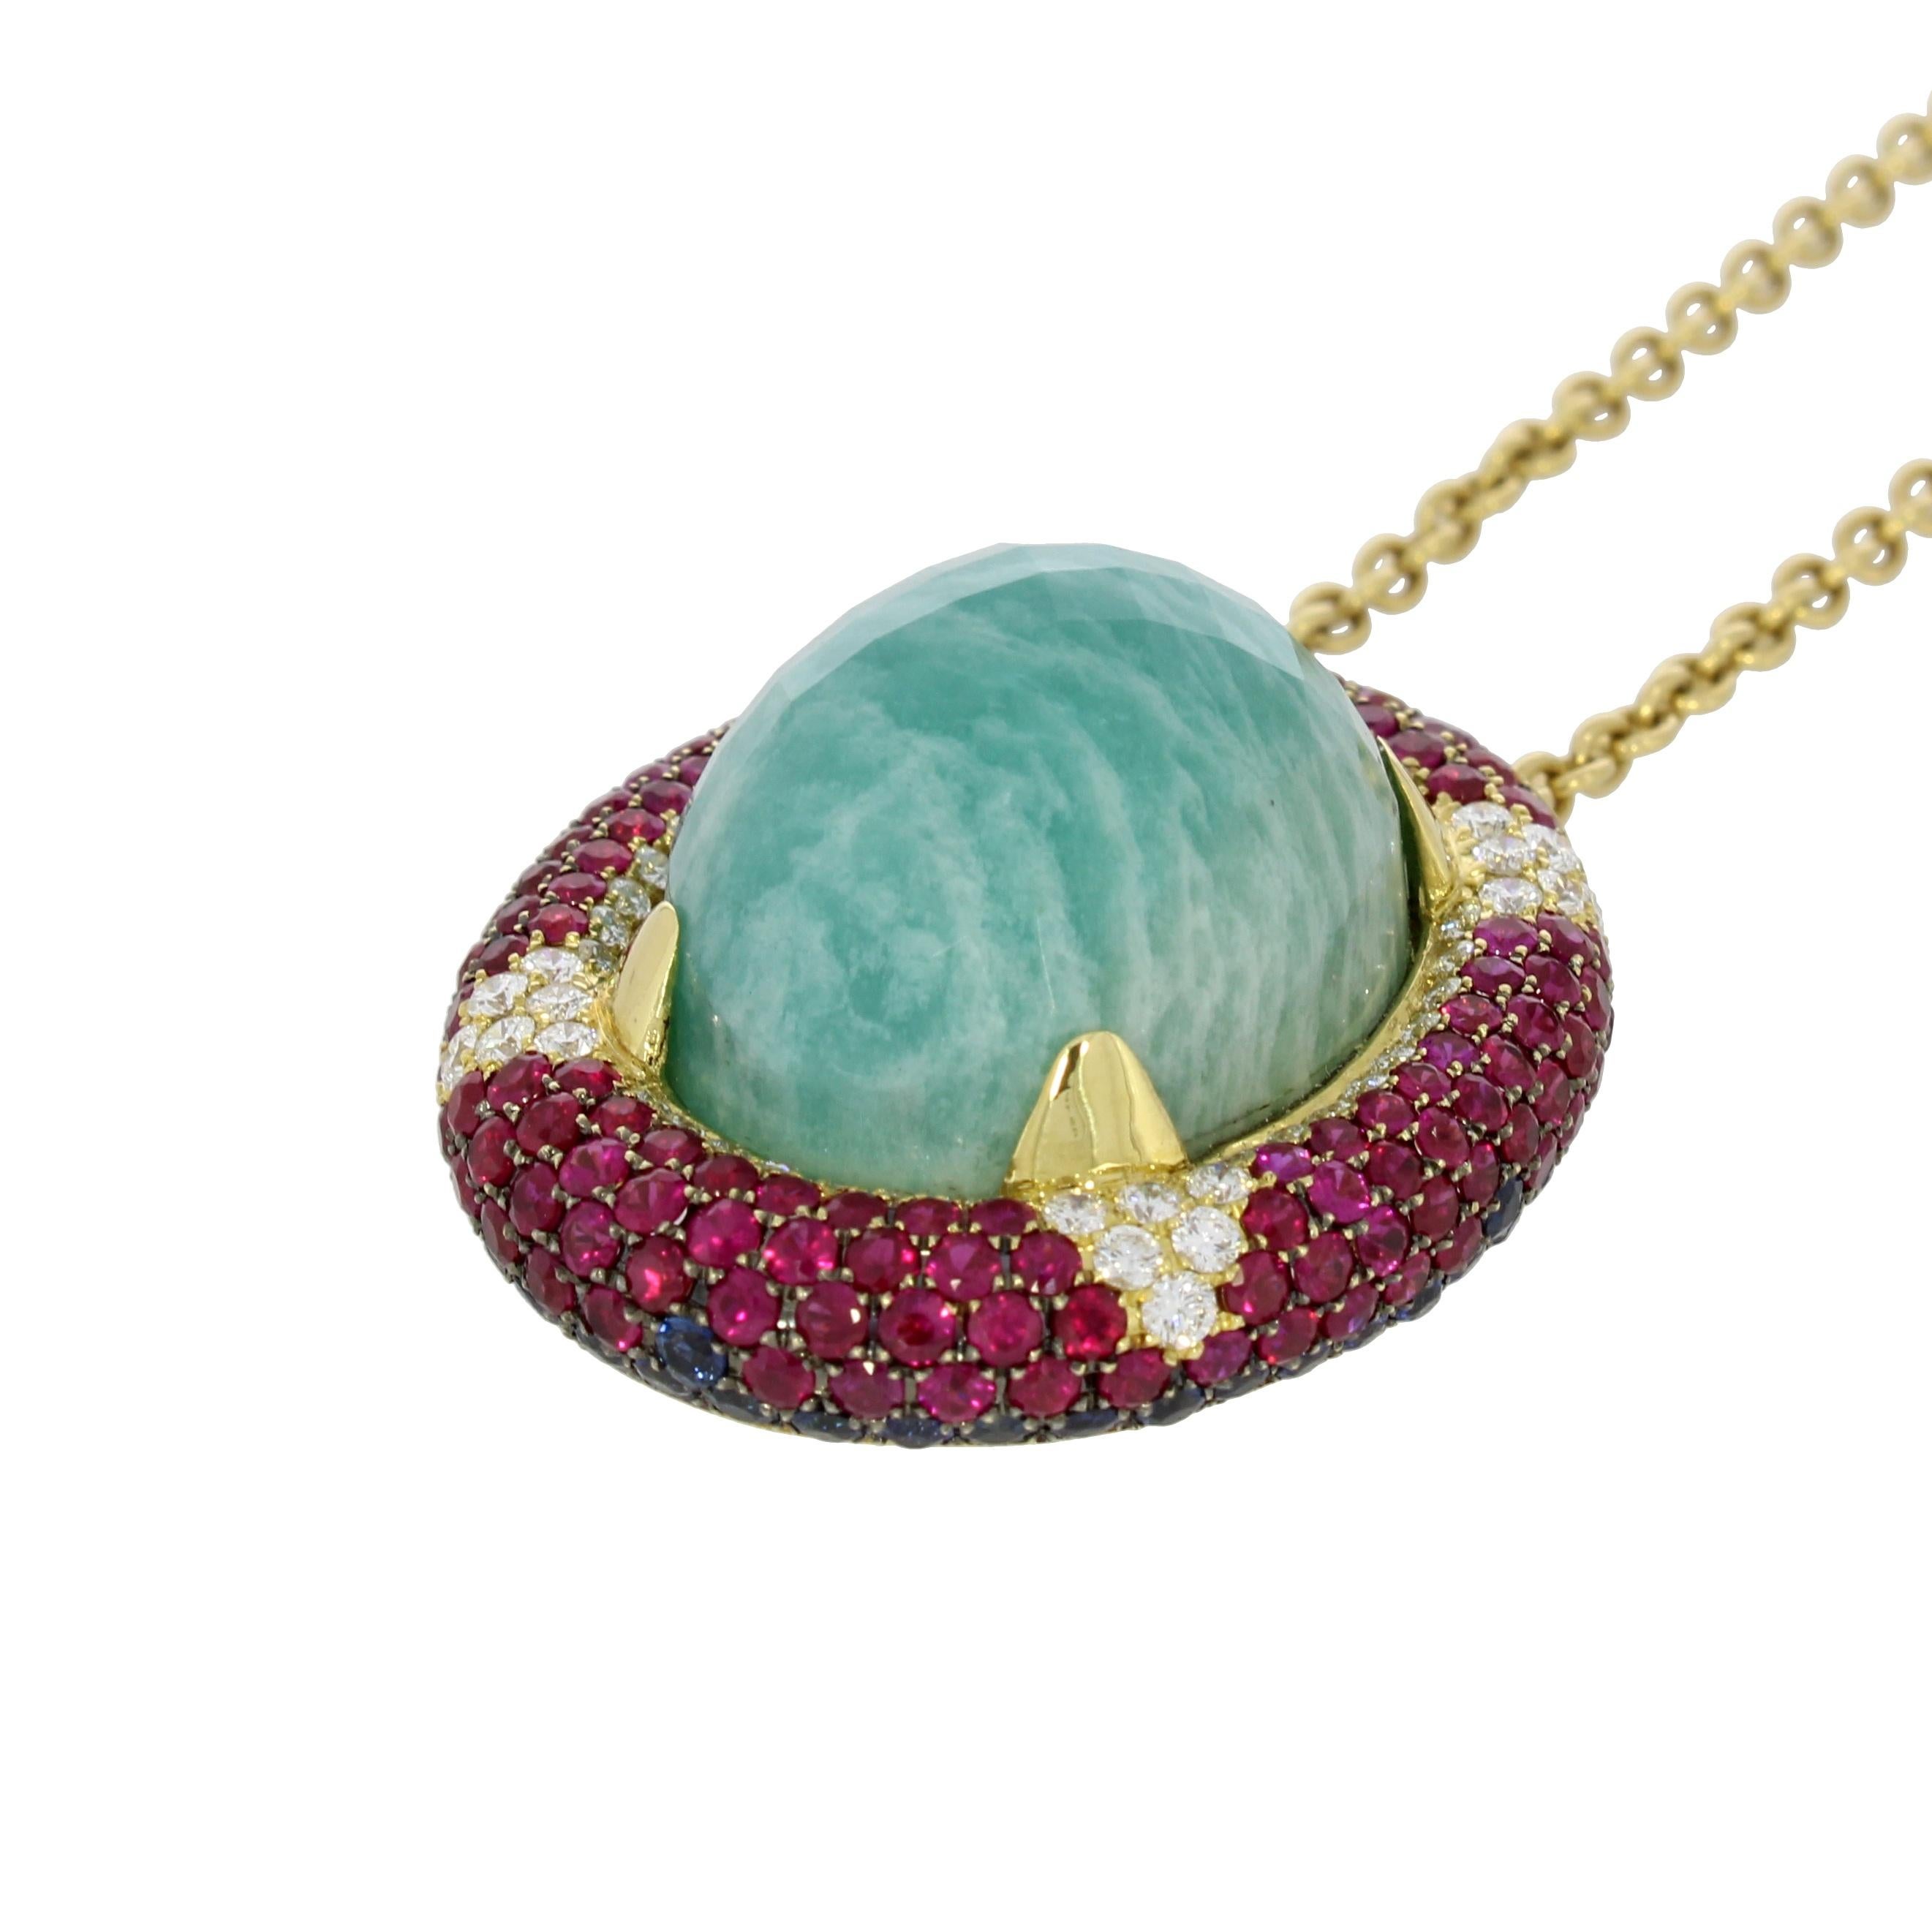 Reminiscent of the colourful Carnival of Venice, this striking composition features a plunging amazonite pendent surrounded by a geometric pattern of rubellite, amethyst and brilliant cut diamonds.

Venice Bauta Large Amazonite Ring
Details
- 18